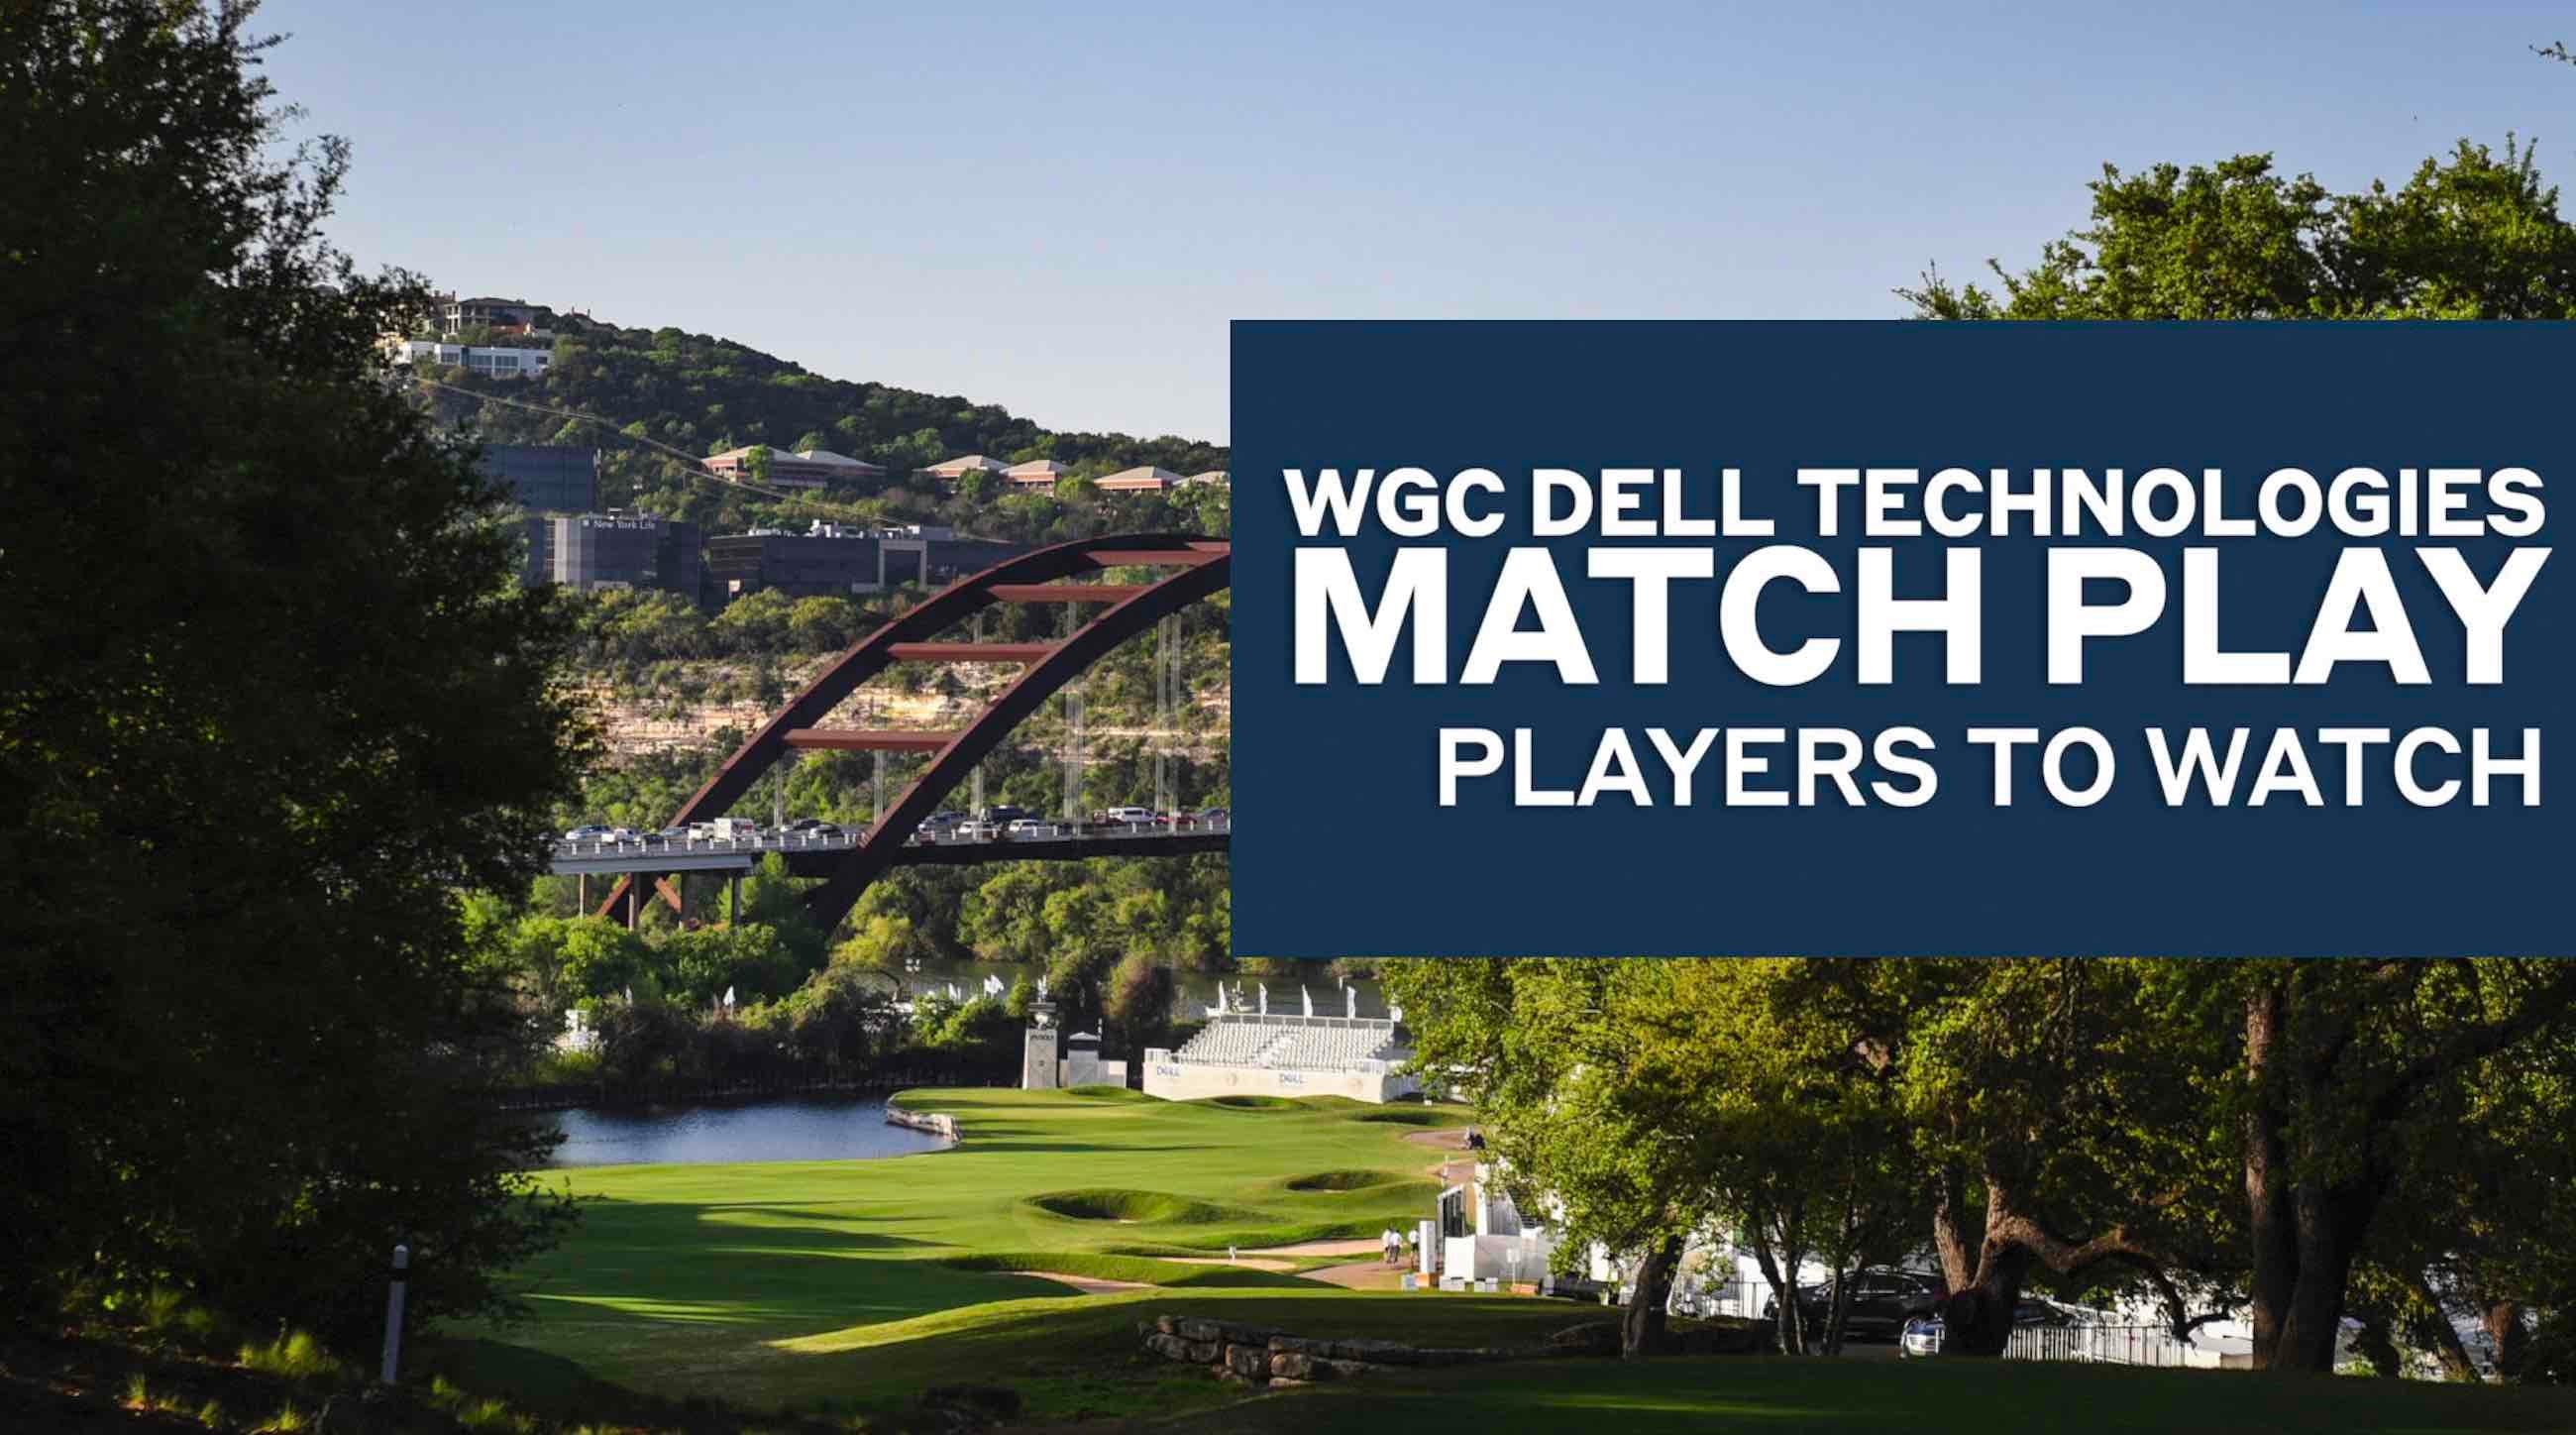 WGC Dell Technologies Match Play Players To Watch